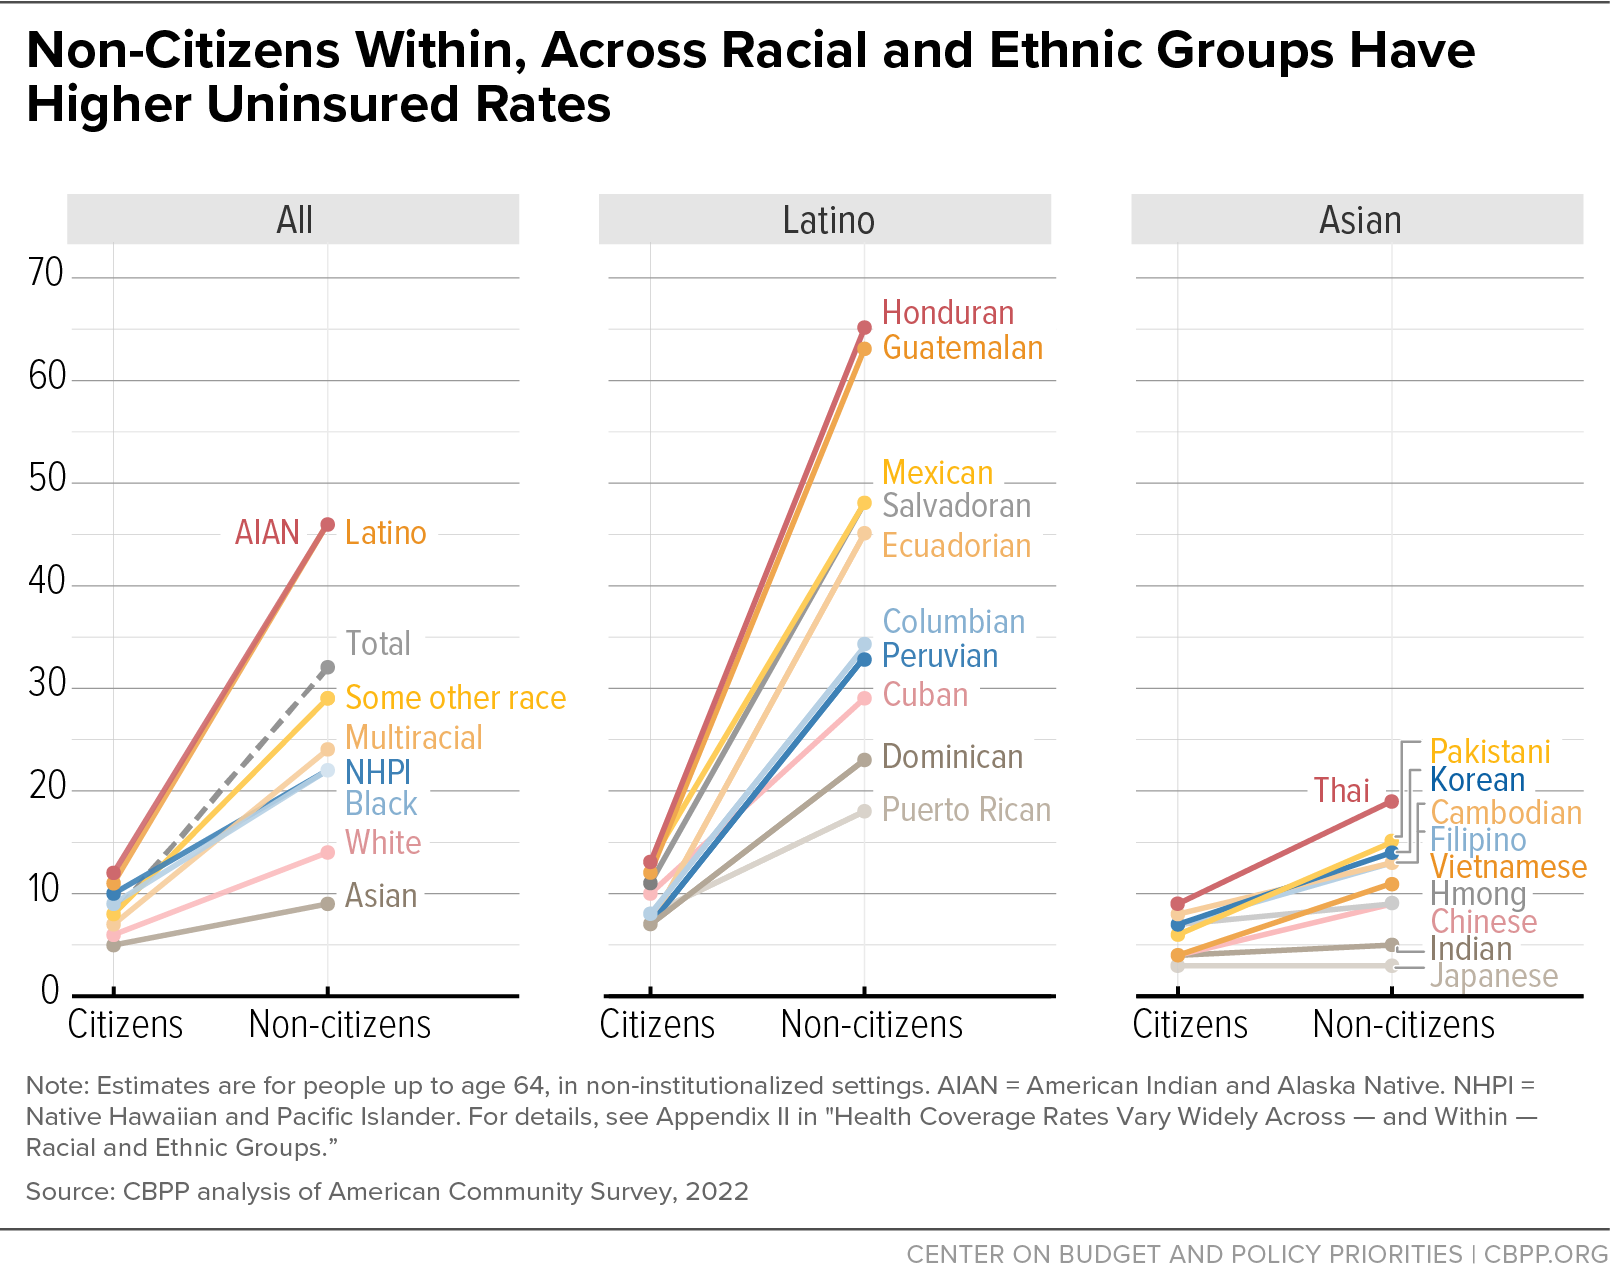 Non-Citizens Within, Across Racial and Ethnic Groups Have Higher Uninsured Rates